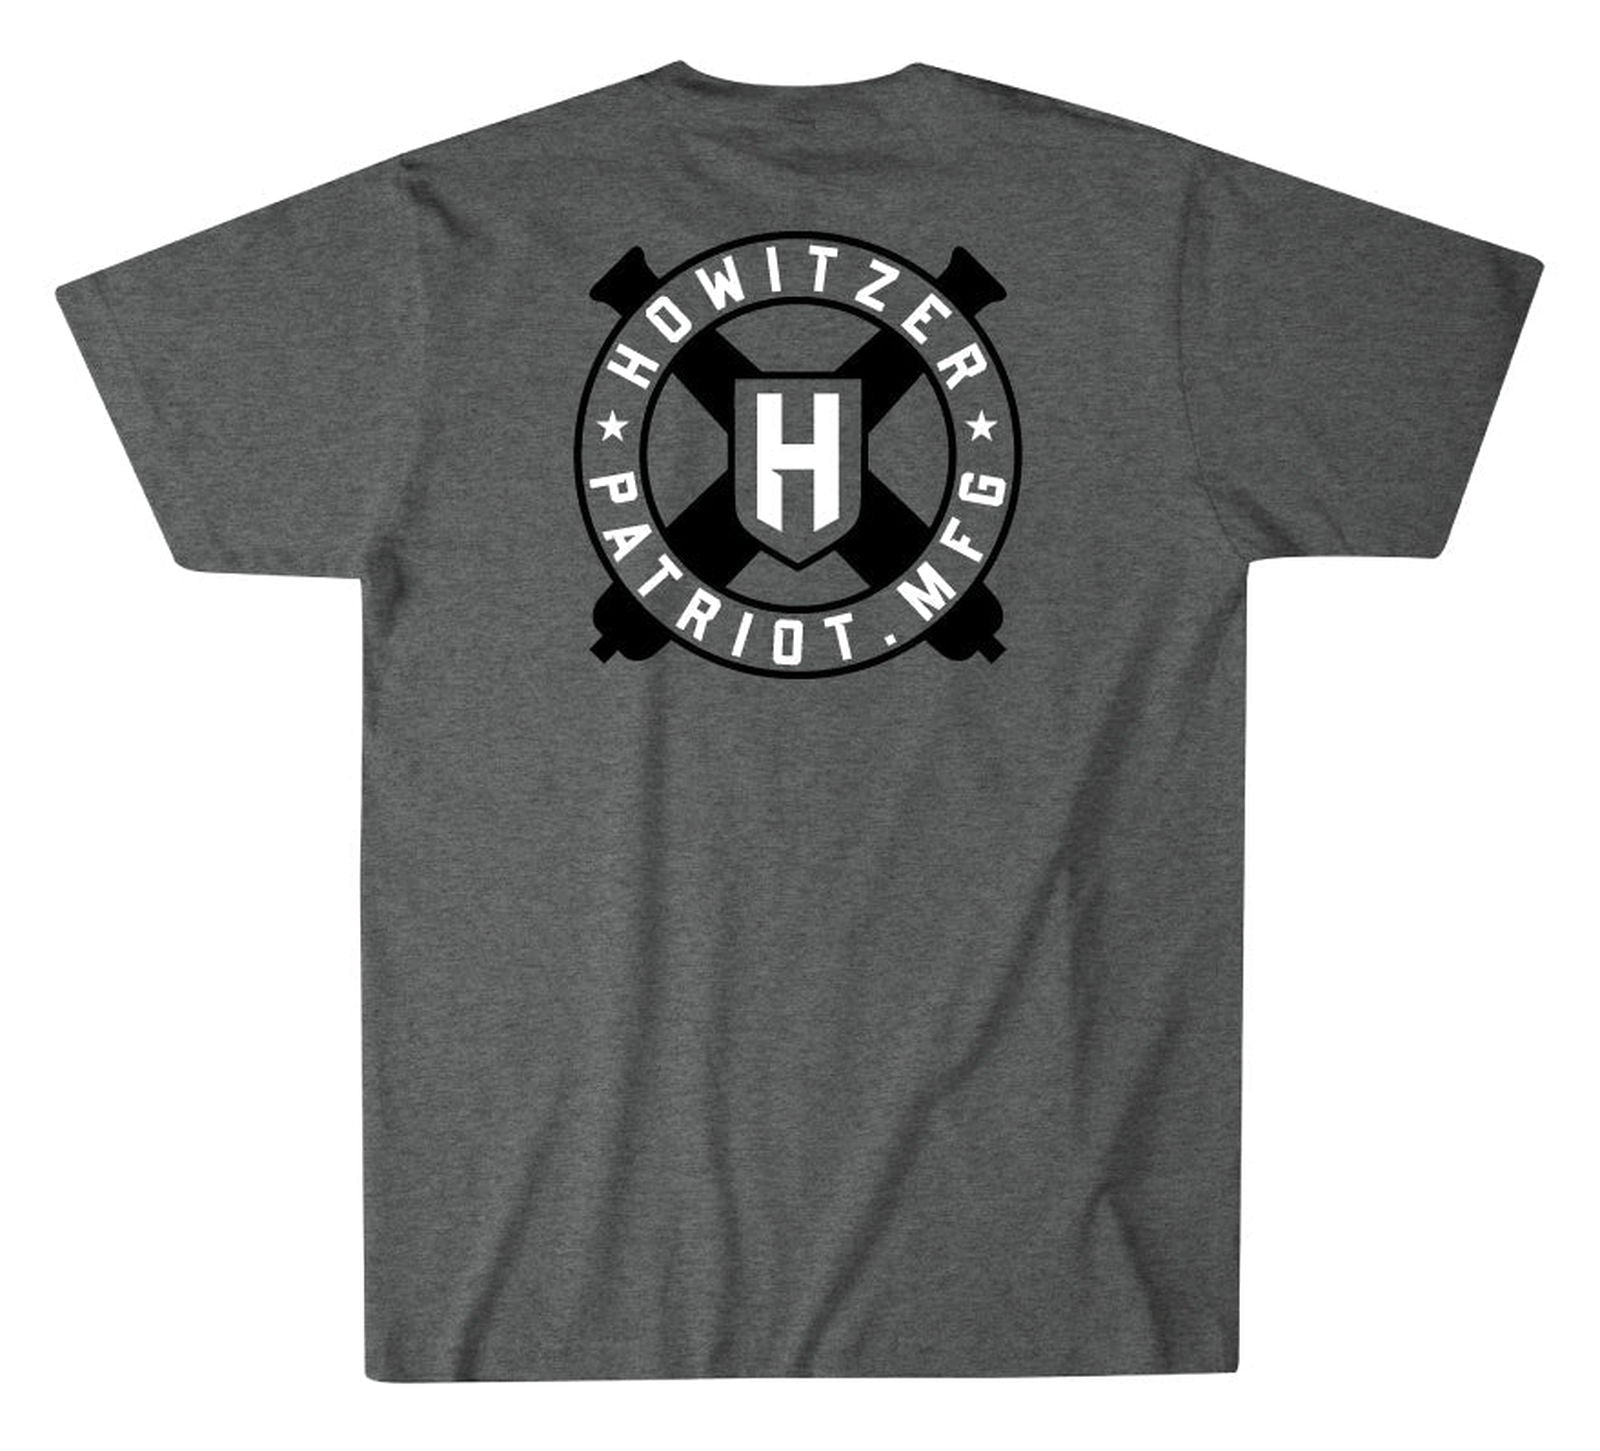 Stand Proud - Howitzer Clothing